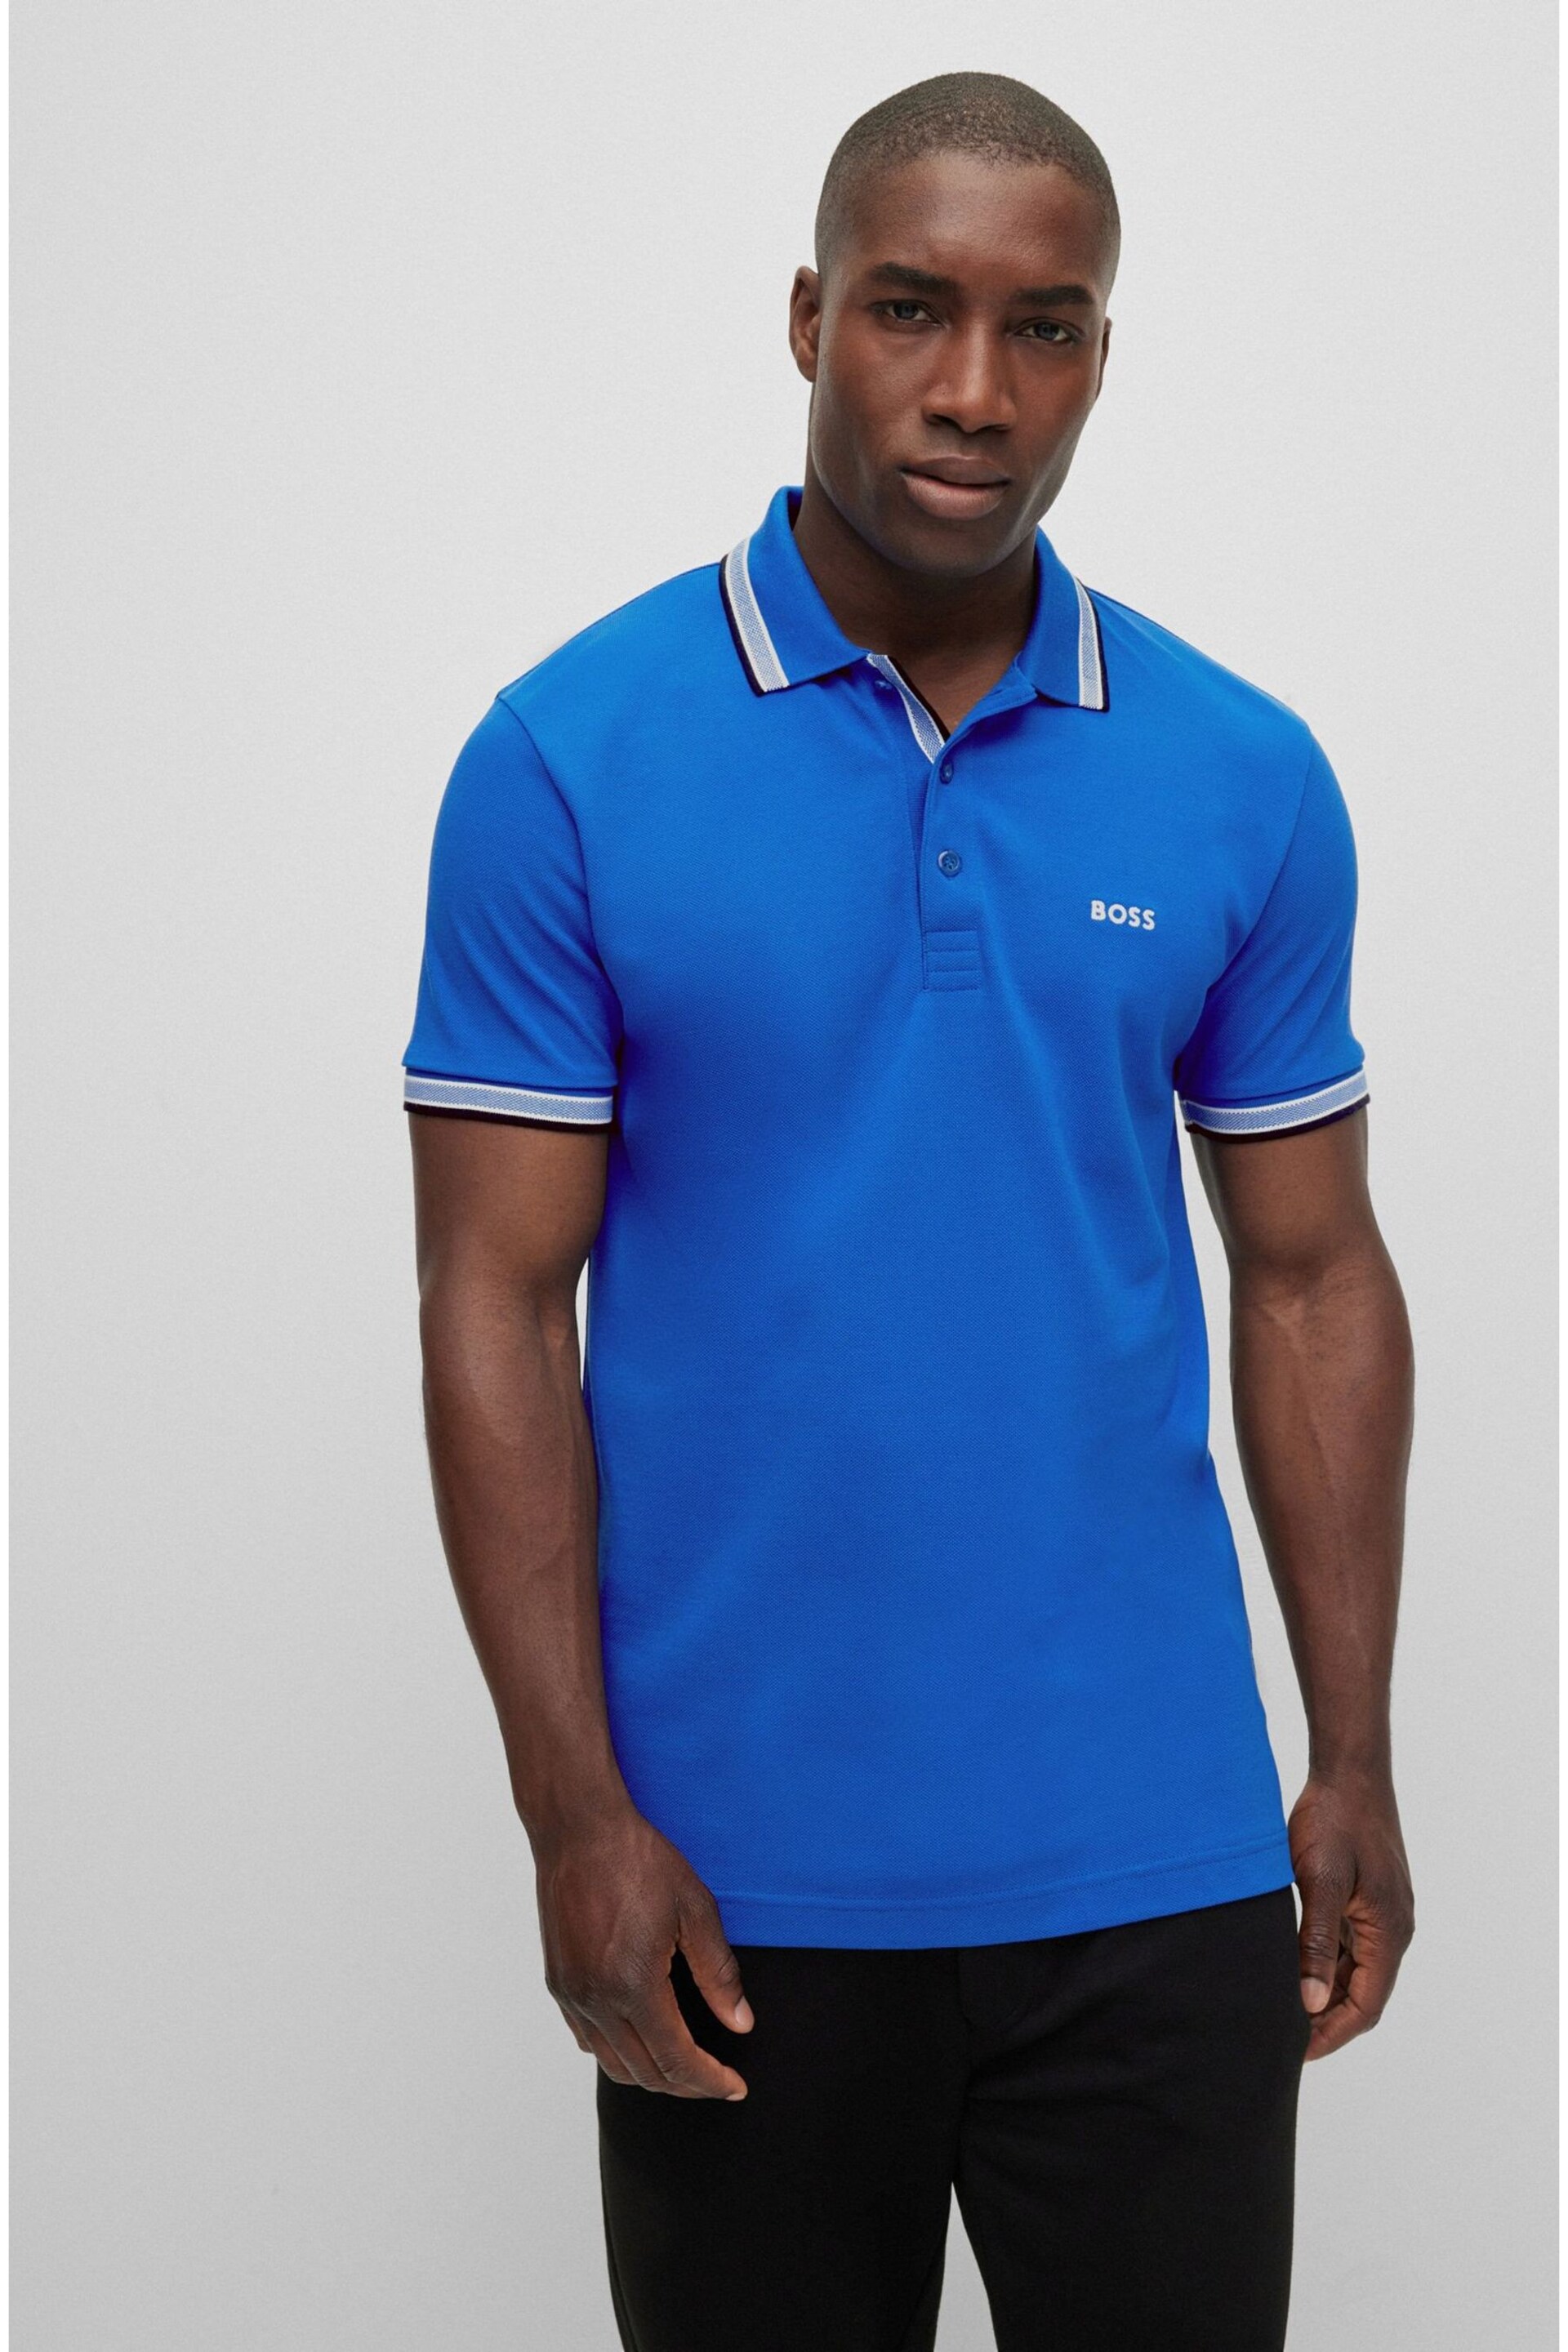 BOSS Bright Blue/Blue Tipping Paddy Polo Shirt - Image 1 of 5